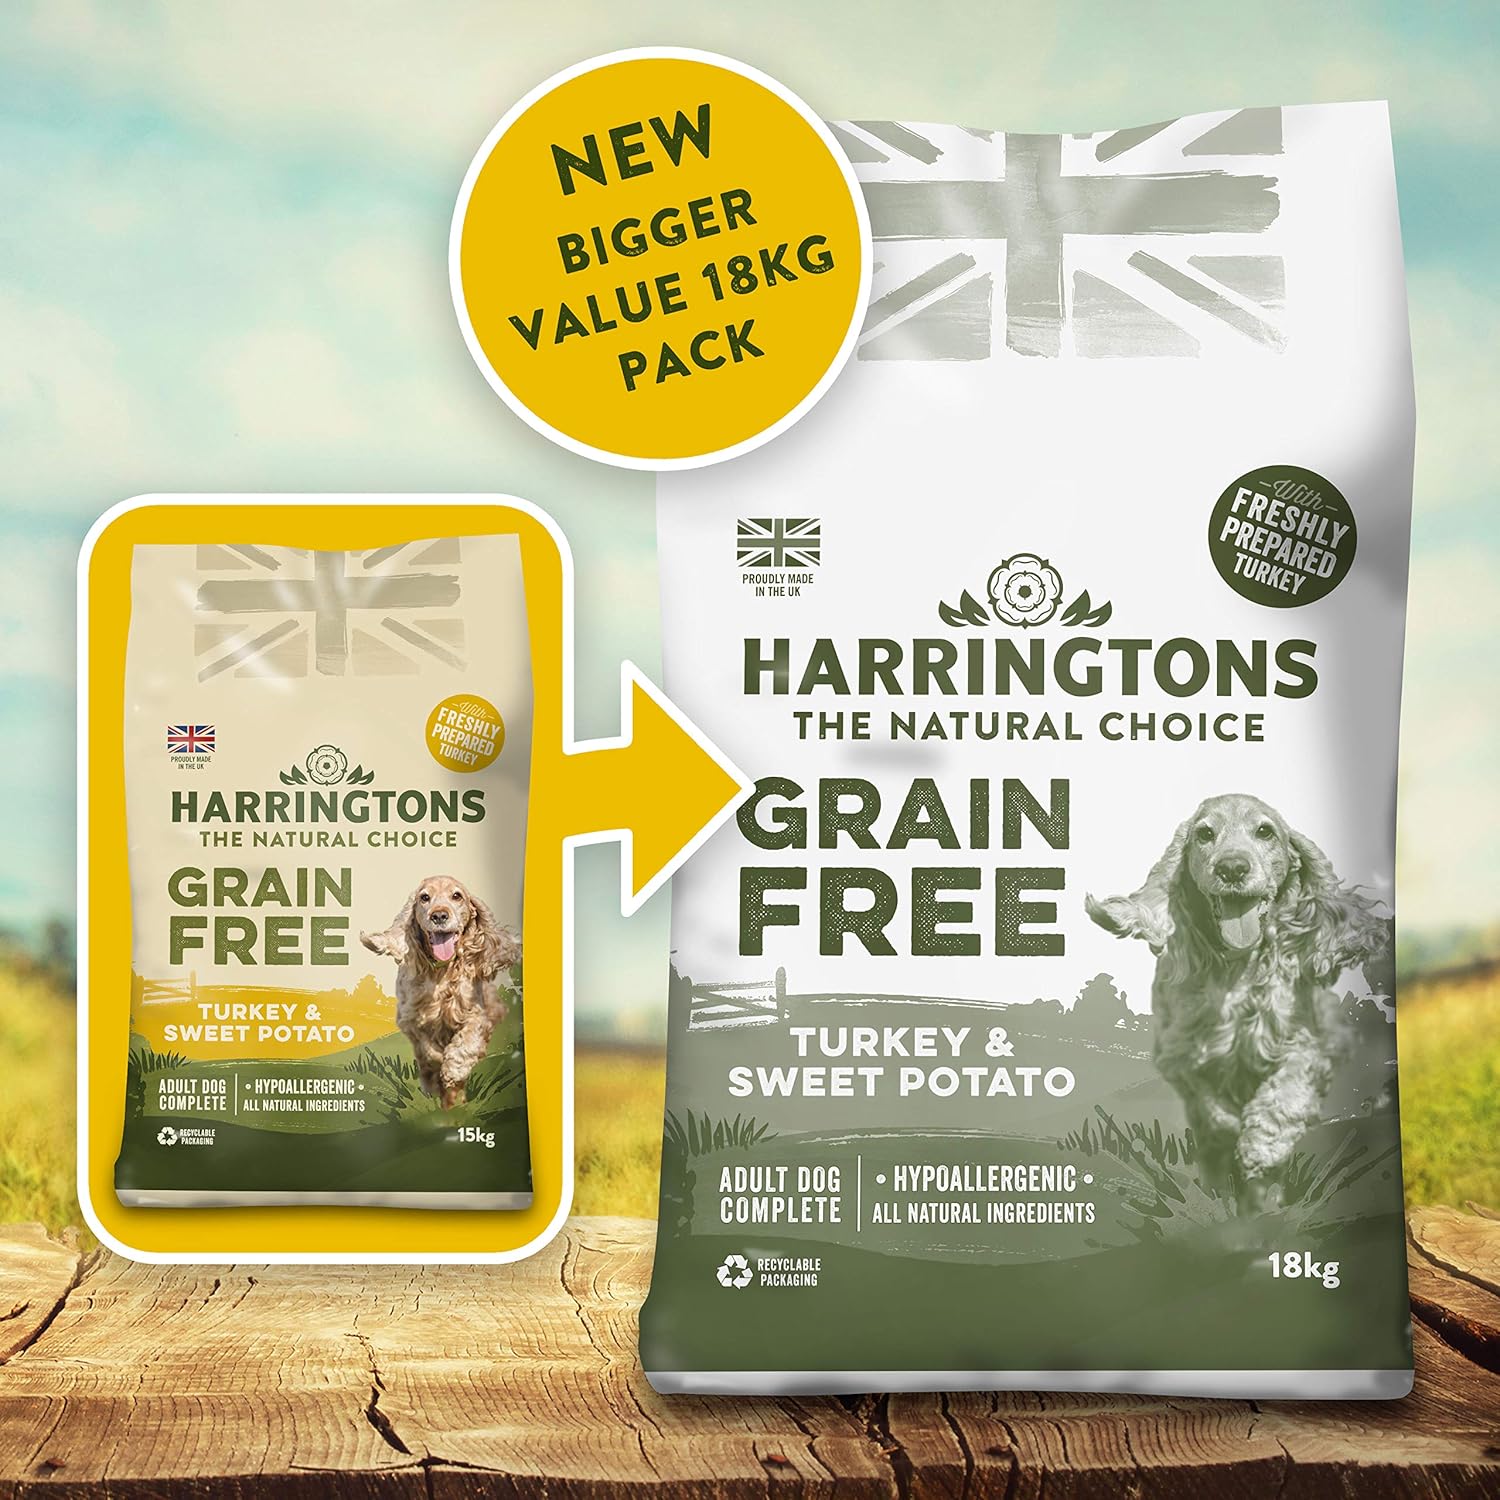 Harringtons Complete Grain Free Hypoallergenic Turkey & Sweet Potato Dry Dog Food 18kg - Made with All Natural Ingredients?GFHYPT-18